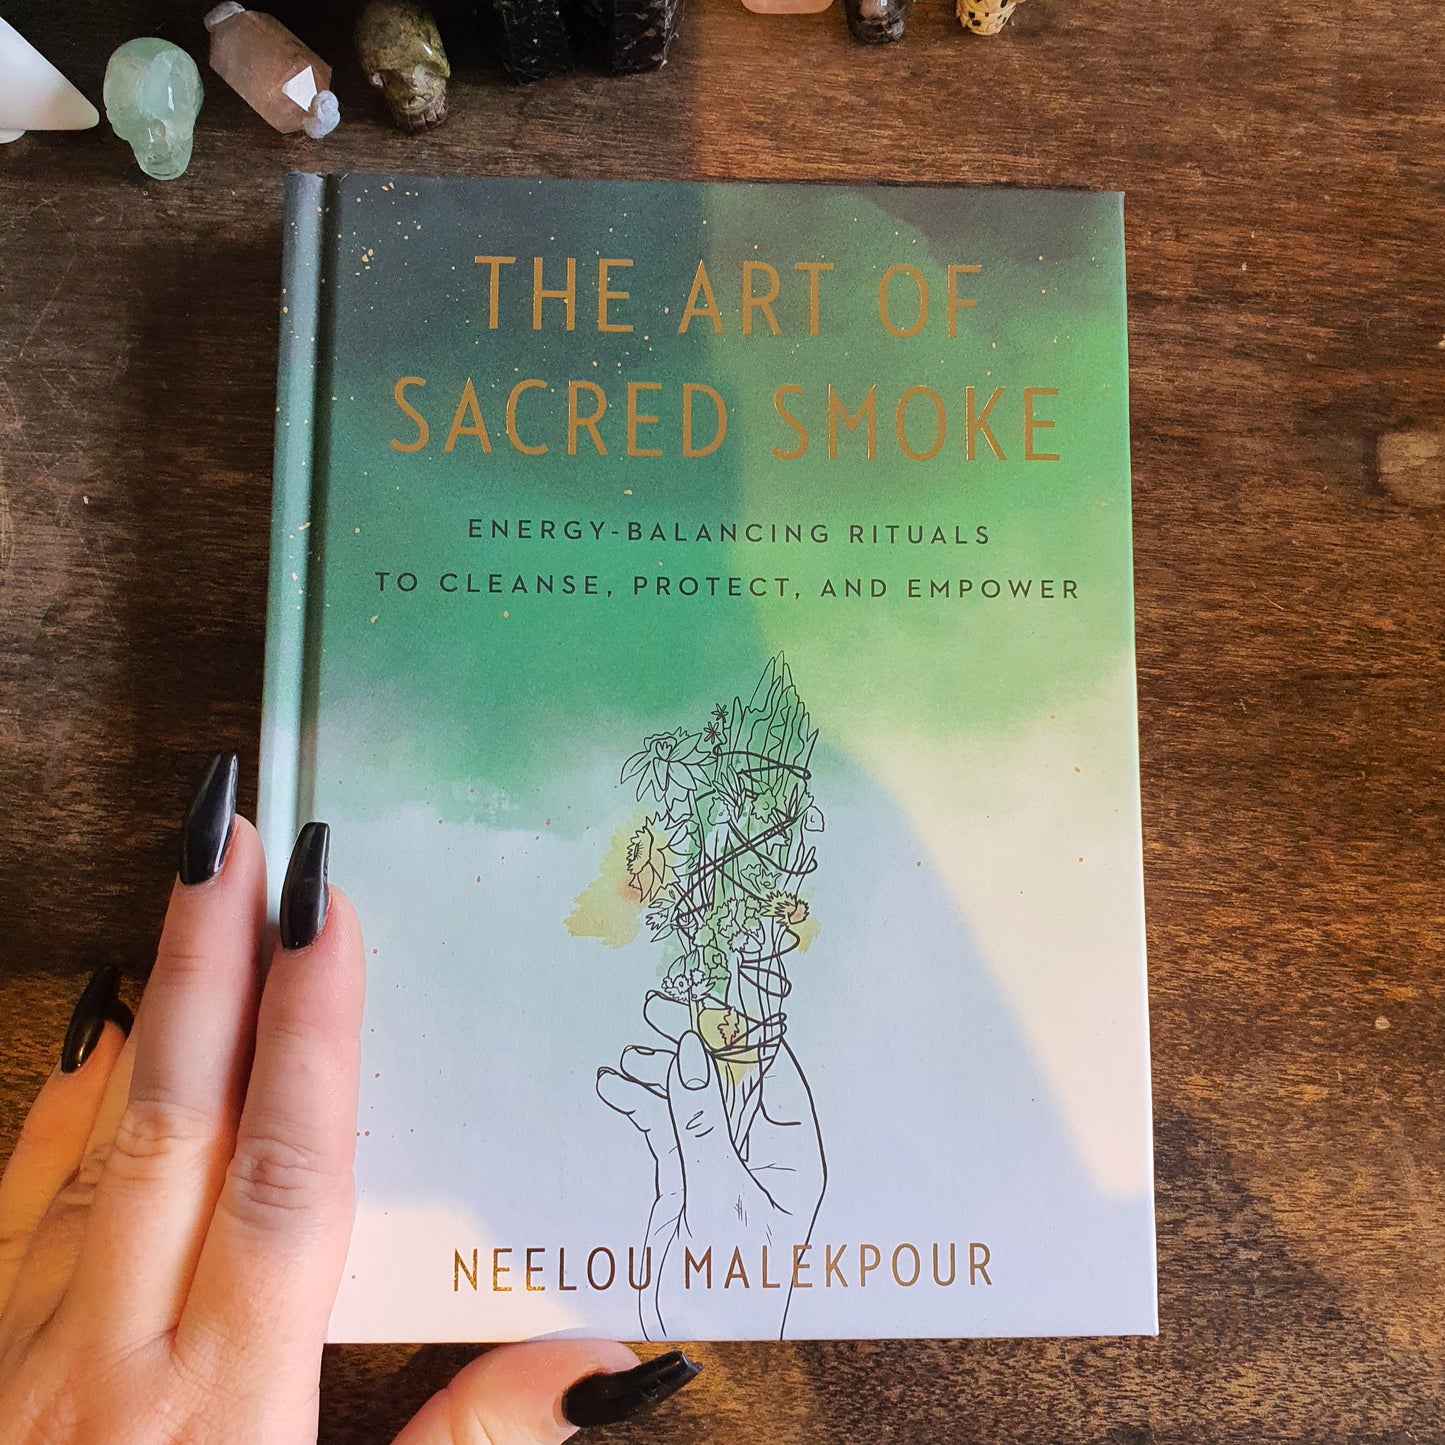 The Art of Sacred Smoke: Energy-Balancing Rituals to Cleanse, Protect, and Empower